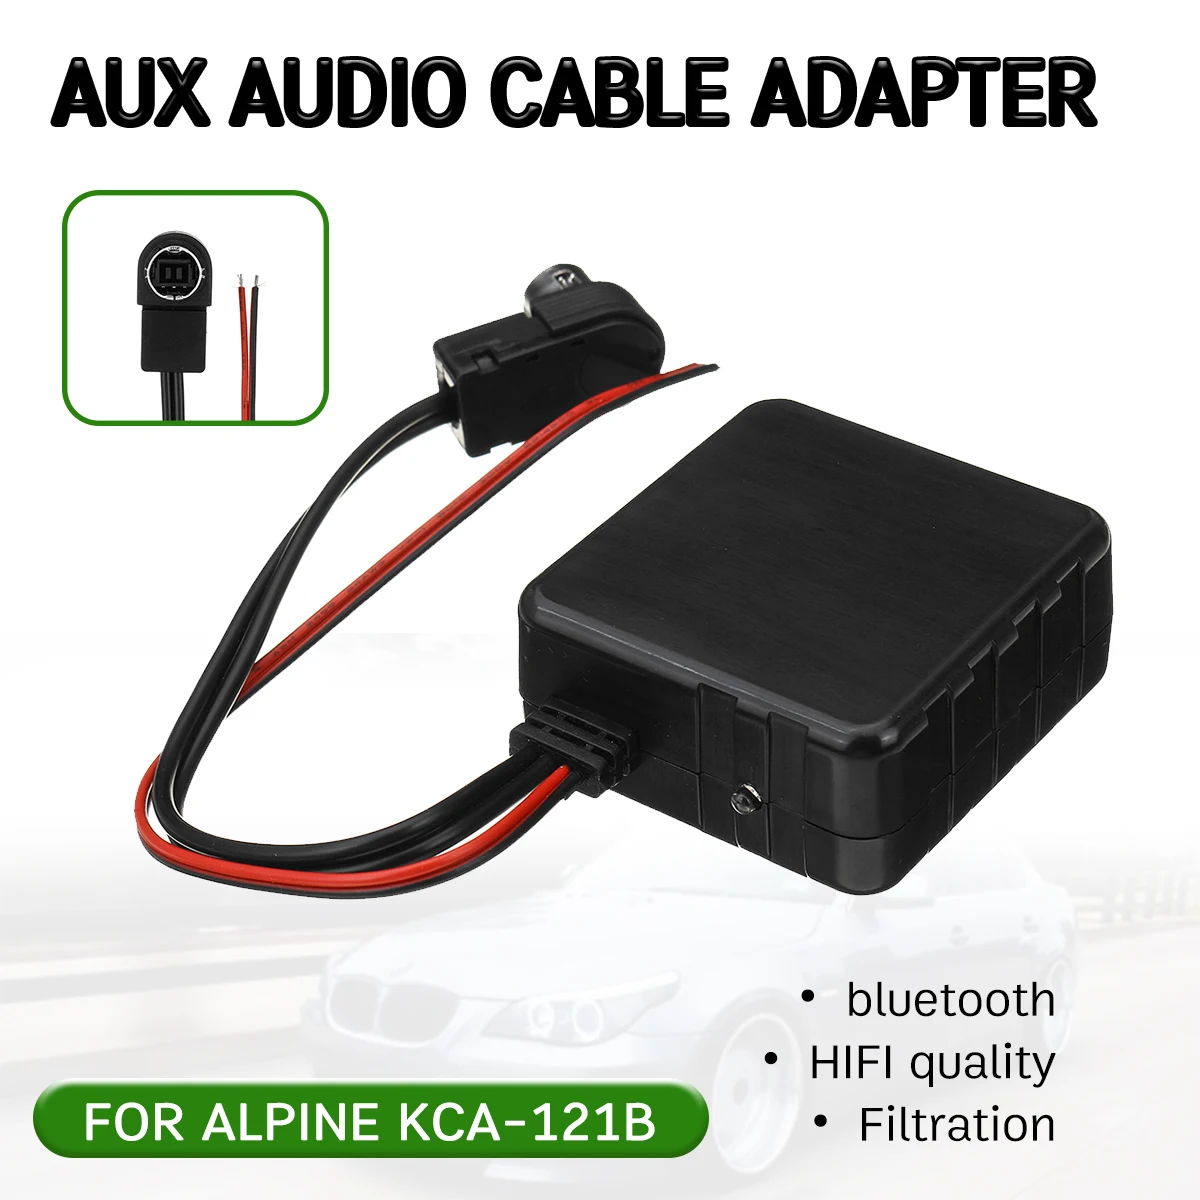 

bluetooth Aux Receiver Cable Adapter Hifi Quality for ALPINE KCA-121B for ALPINE 9887/105/117/9855/305S Audio Head Unit